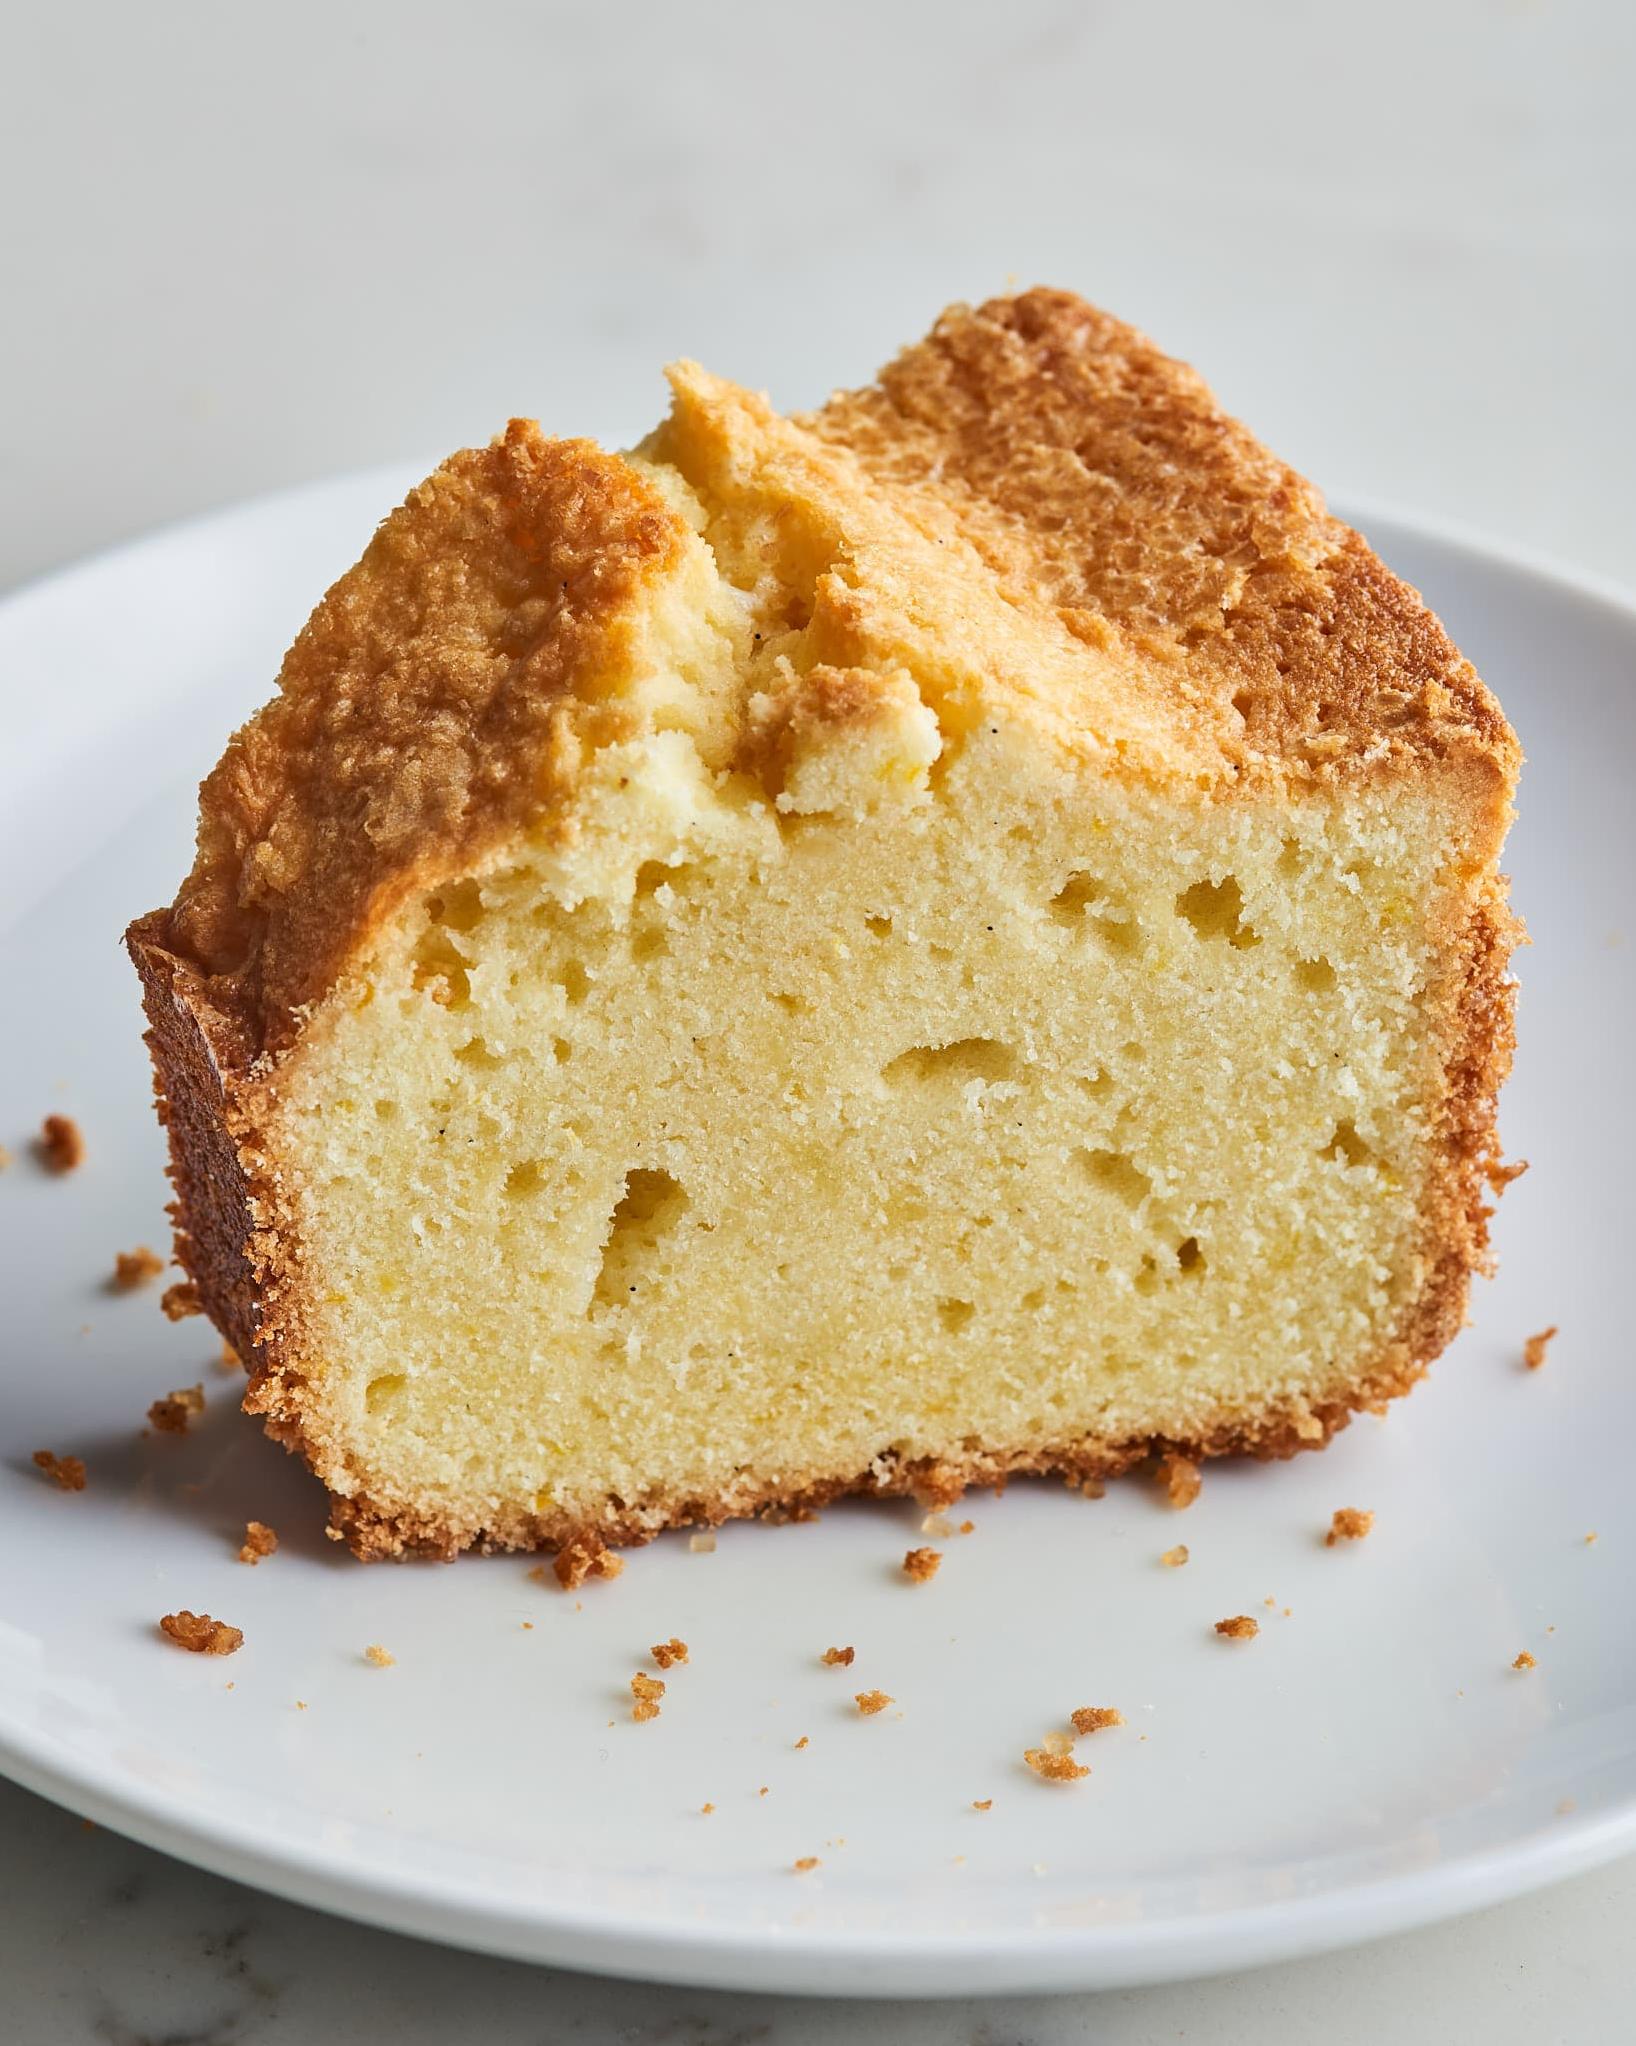  Allow me to introduce you to the most luxurious pound cake in existence.